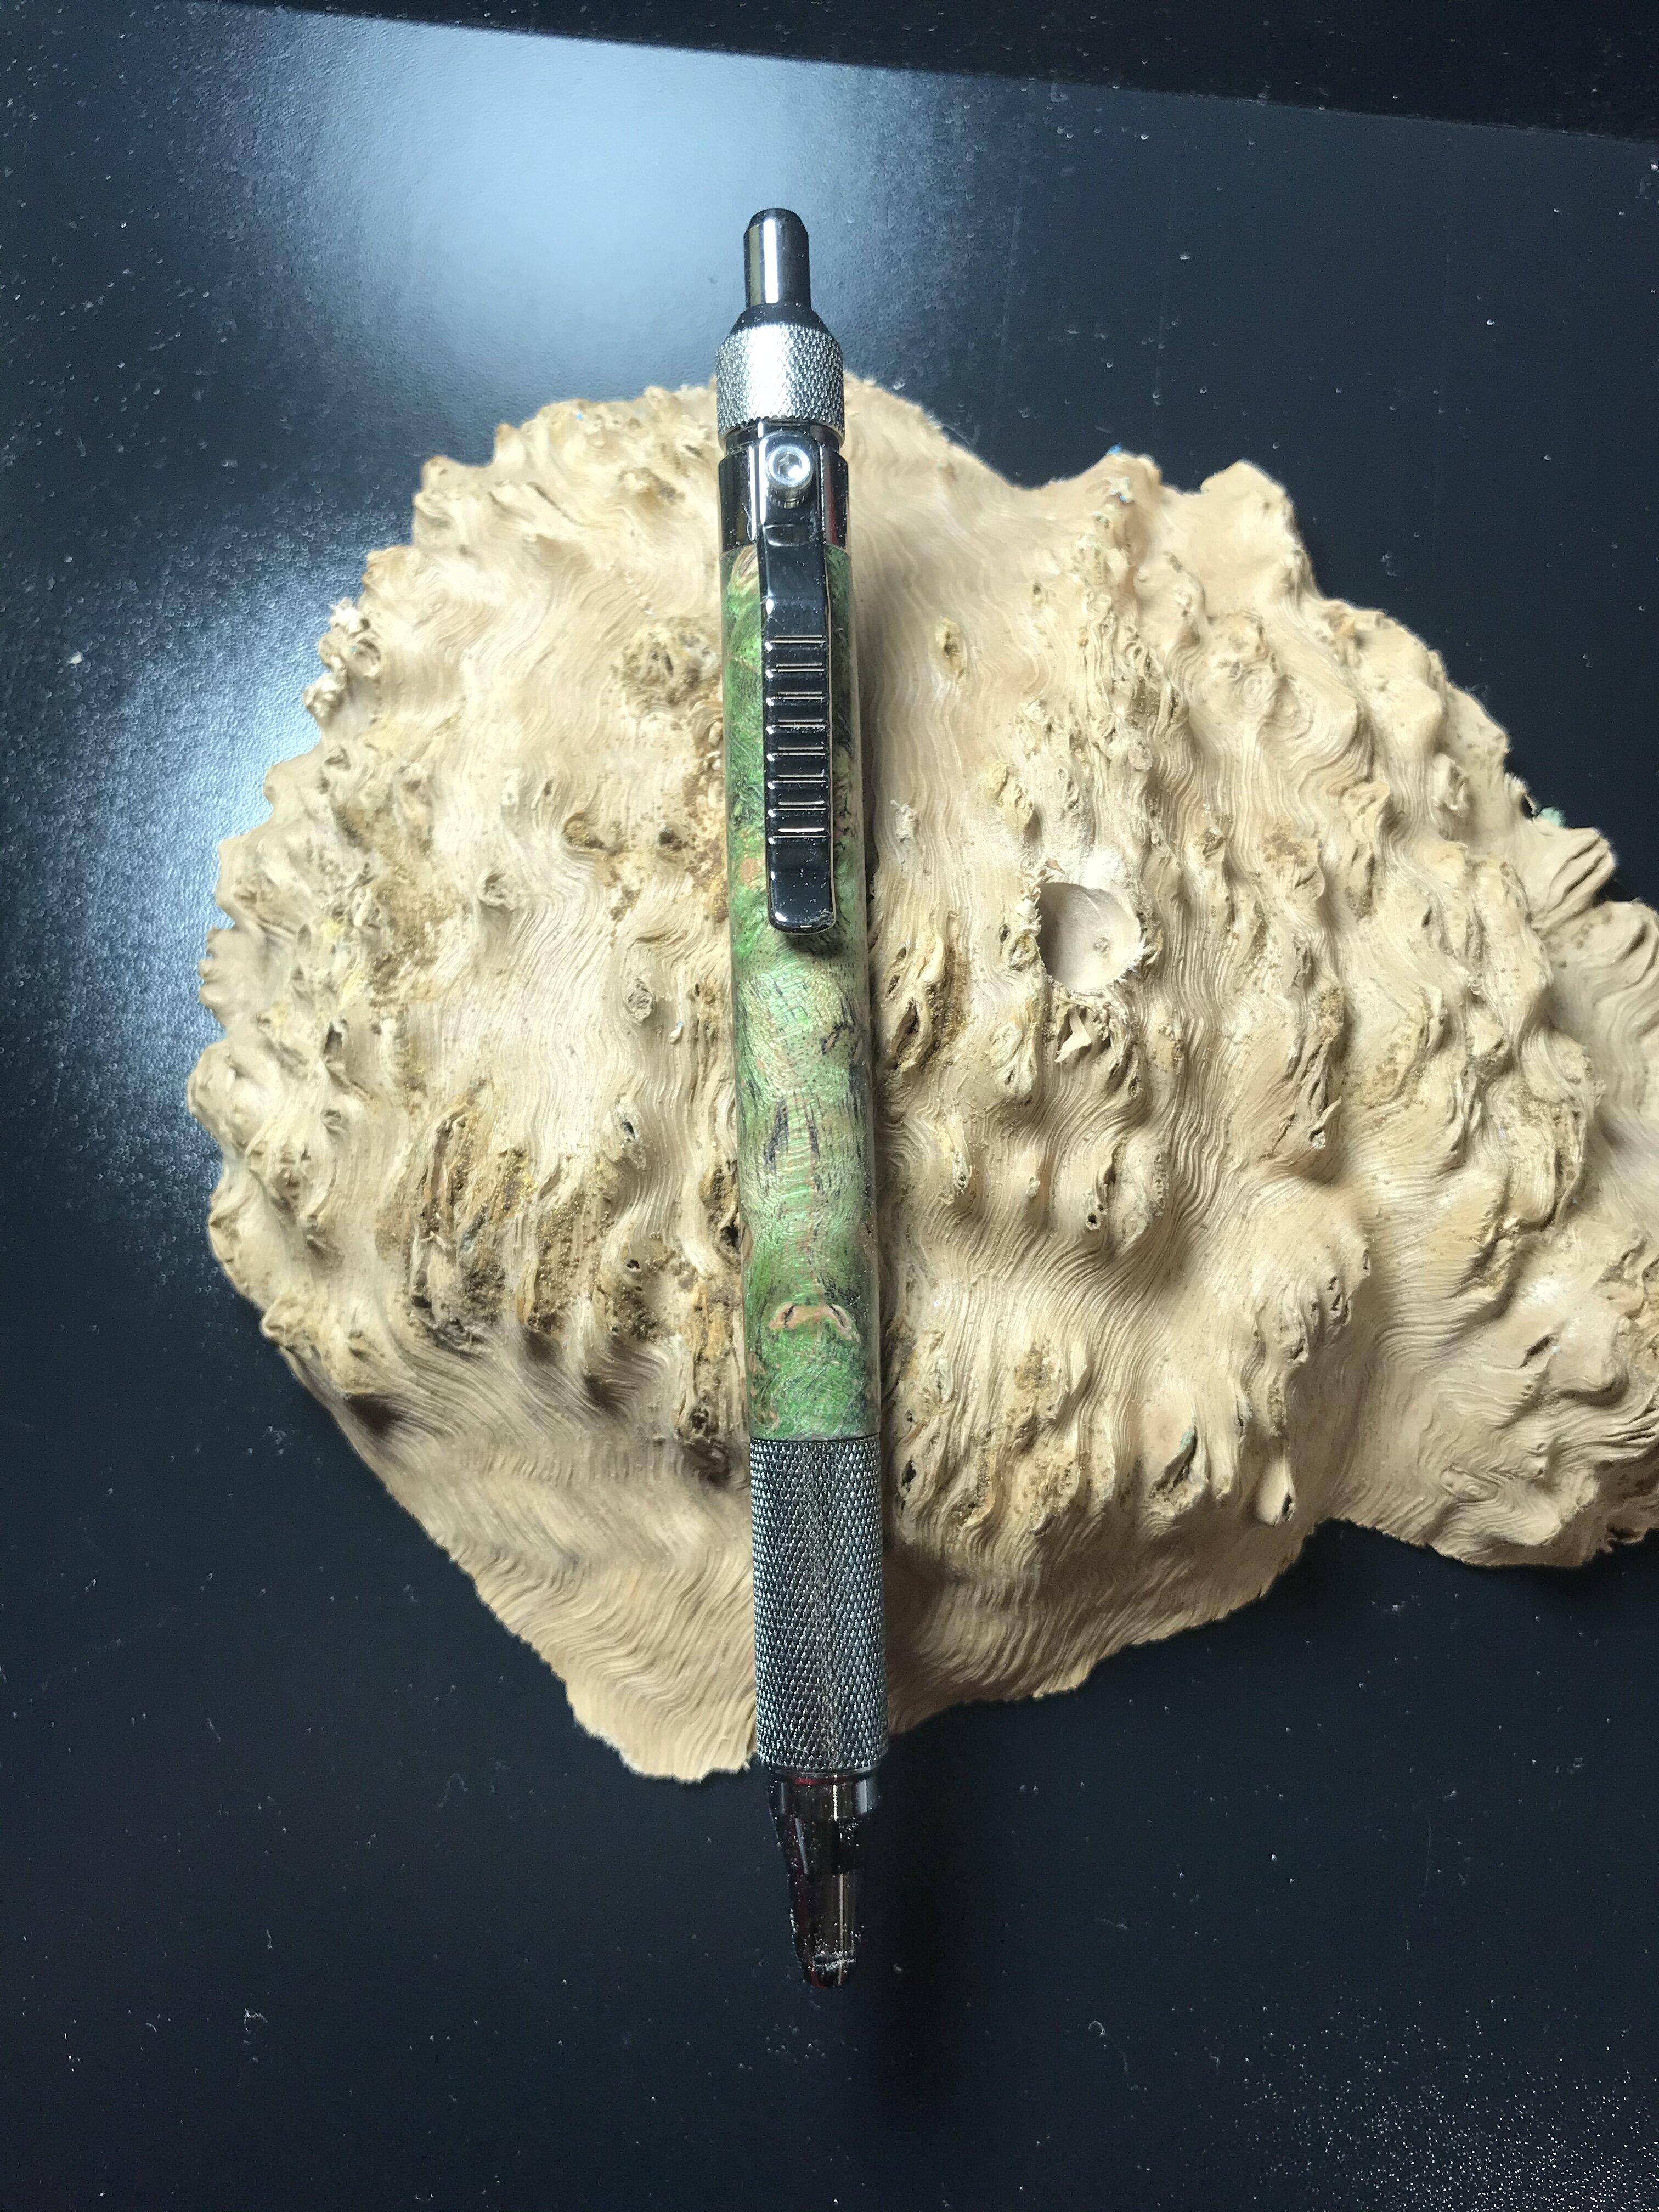 Stabilized Double Dyed (Lime & Black) Maple Burl on an Anvil EDC Click Pen